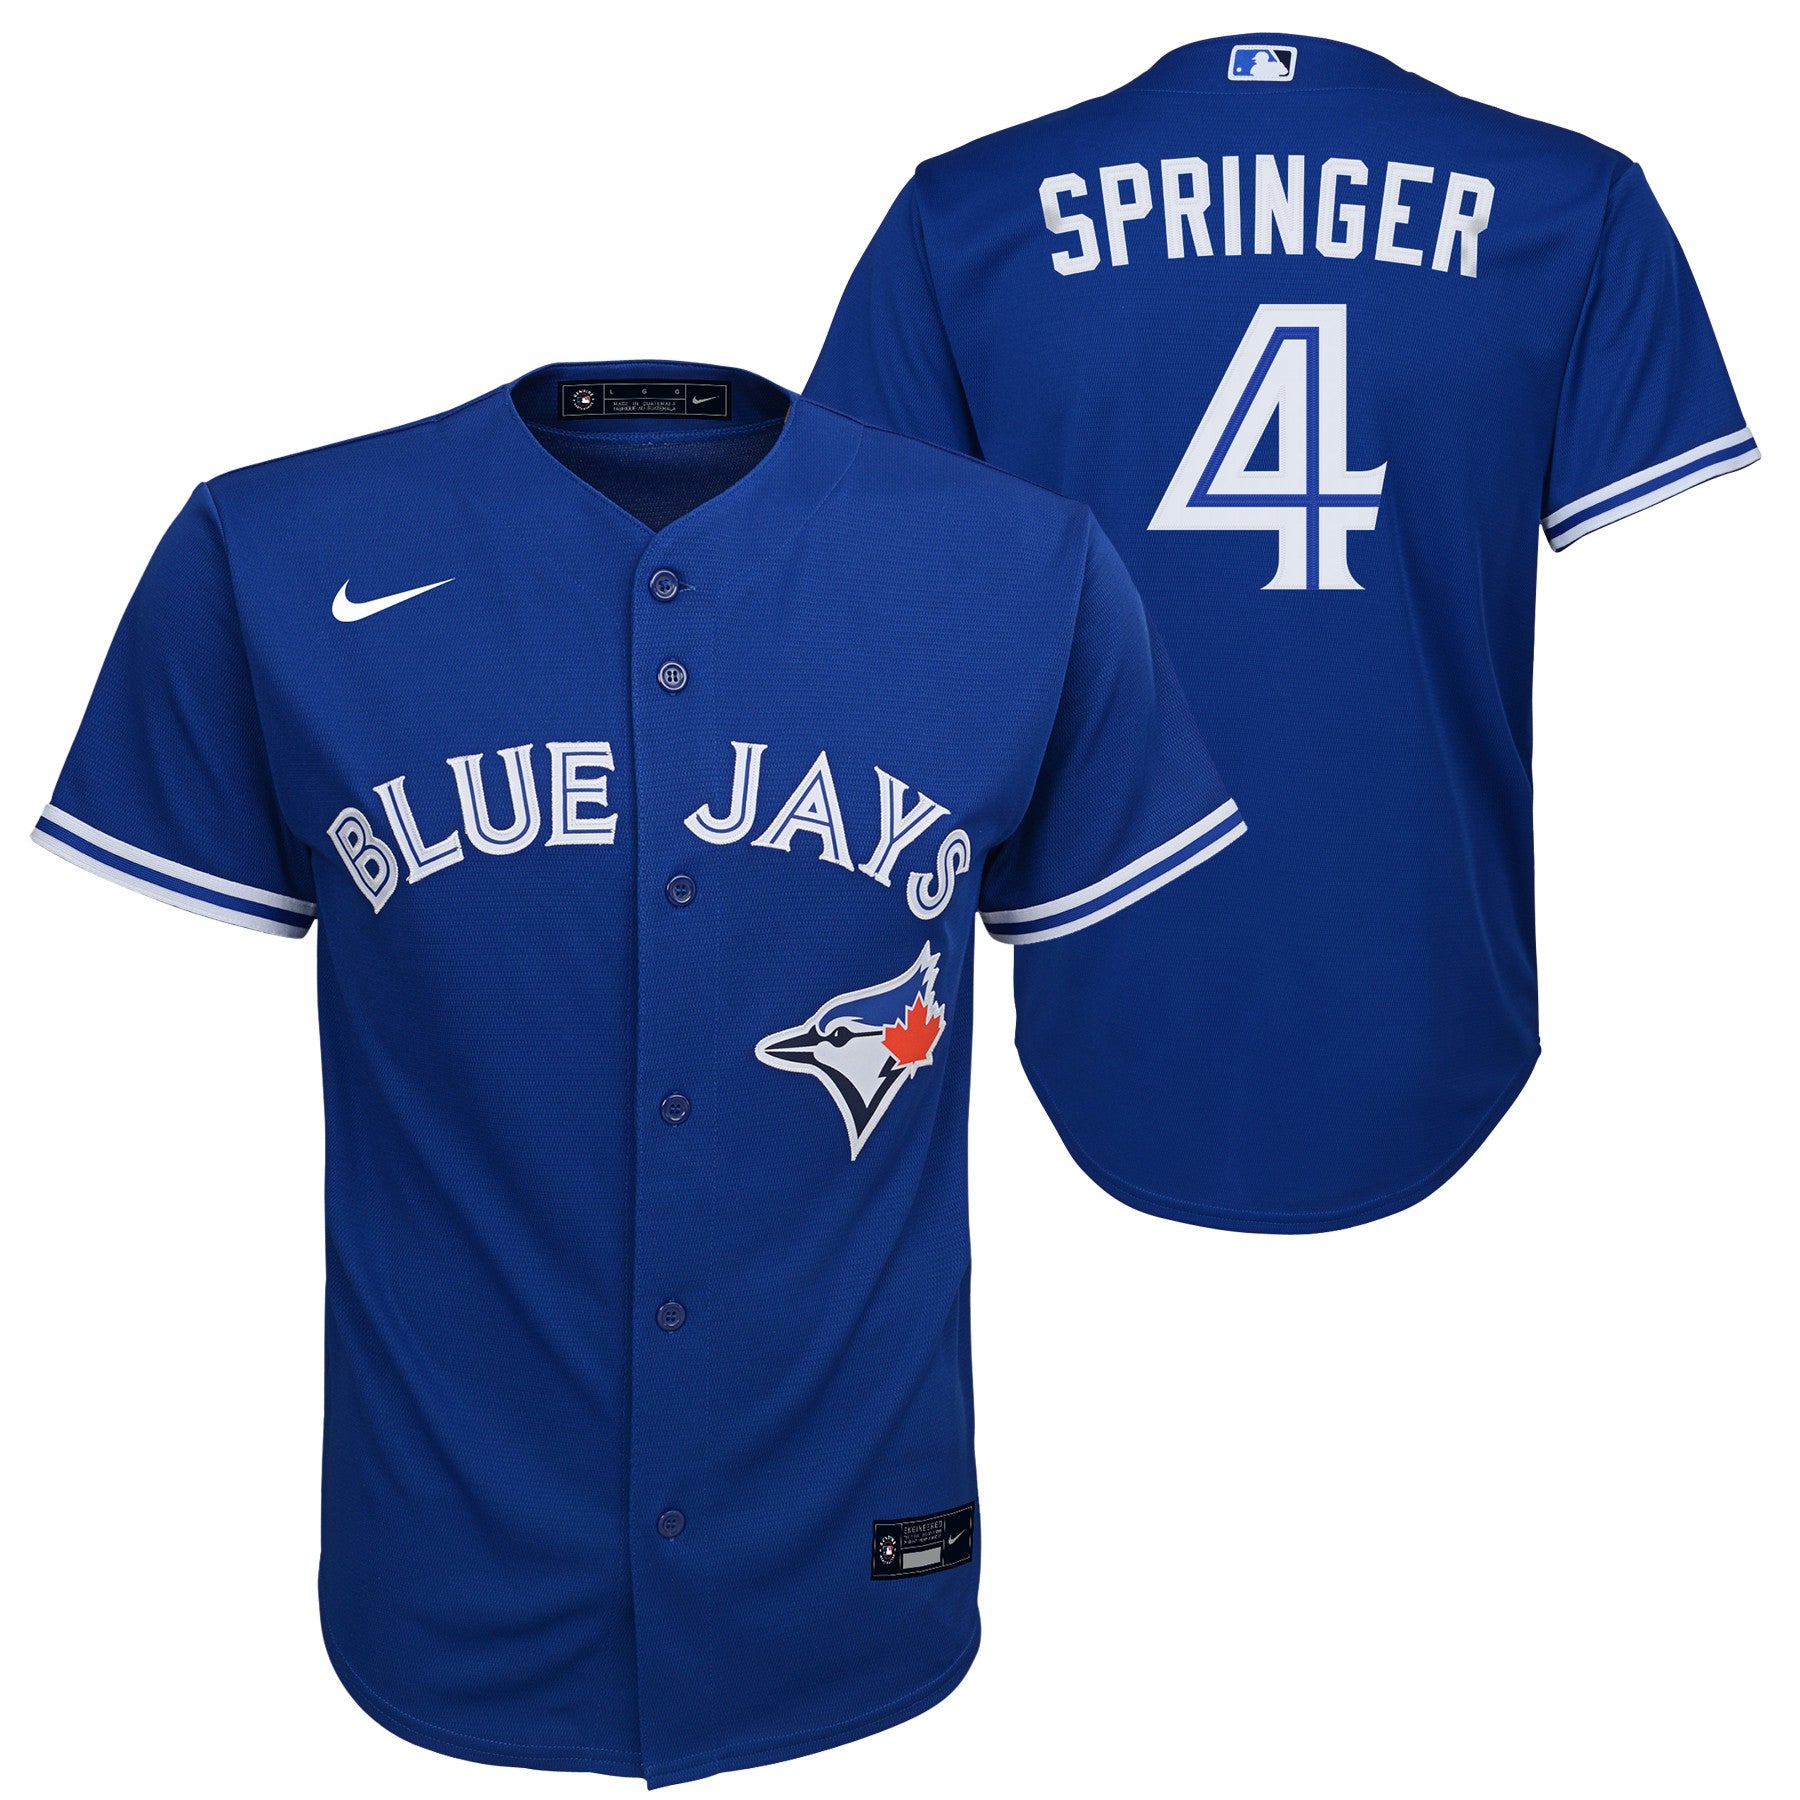 George Springer Blue Jays Jersey White Authentic